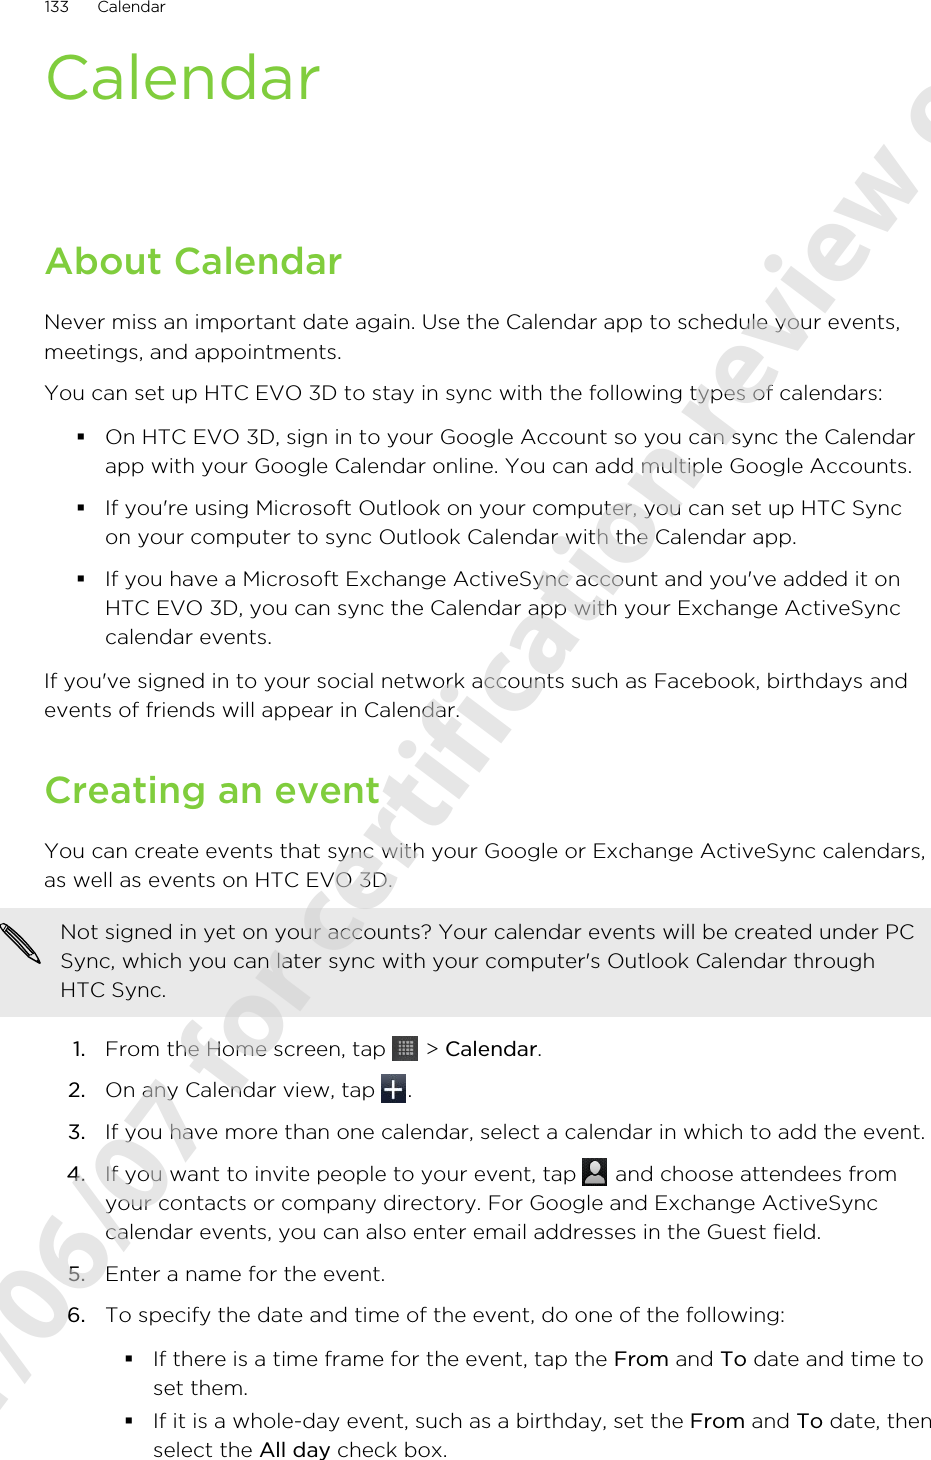 CalendarAbout CalendarNever miss an important date again. Use the Calendar app to schedule your events,meetings, and appointments.You can set up HTC EVO 3D to stay in sync with the following types of calendars:§On HTC EVO 3D, sign in to your Google Account so you can sync the Calendarapp with your Google Calendar online. You can add multiple Google Accounts.§If you&apos;re using Microsoft Outlook on your computer, you can set up HTC Syncon your computer to sync Outlook Calendar with the Calendar app.§If you have a Microsoft Exchange ActiveSync account and you&apos;ve added it onHTC EVO 3D, you can sync the Calendar app with your Exchange ActiveSynccalendar events.If you&apos;ve signed in to your social network accounts such as Facebook, birthdays andevents of friends will appear in Calendar.Creating an eventYou can create events that sync with your Google or Exchange ActiveSync calendars,as well as events on HTC EVO 3D.Not signed in yet on your accounts? Your calendar events will be created under PCSync, which you can later sync with your computer&apos;s Outlook Calendar throughHTC Sync.1. From the Home screen, tap   &gt; Calendar.2. On any Calendar view, tap  .3. If you have more than one calendar, select a calendar in which to add the event.4. If you want to invite people to your event, tap   and choose attendees fromyour contacts or company directory. For Google and Exchange ActiveSynccalendar events, you can also enter email addresses in the Guest field.5. Enter a name for the event.6. To specify the date and time of the event, do one of the following:§If there is a time frame for the event, tap the From and To date and time toset them.§If it is a whole-day event, such as a birthday, set the From and To date, thenselect the All day check box.133 Calendar2011/06/07 for certification review only